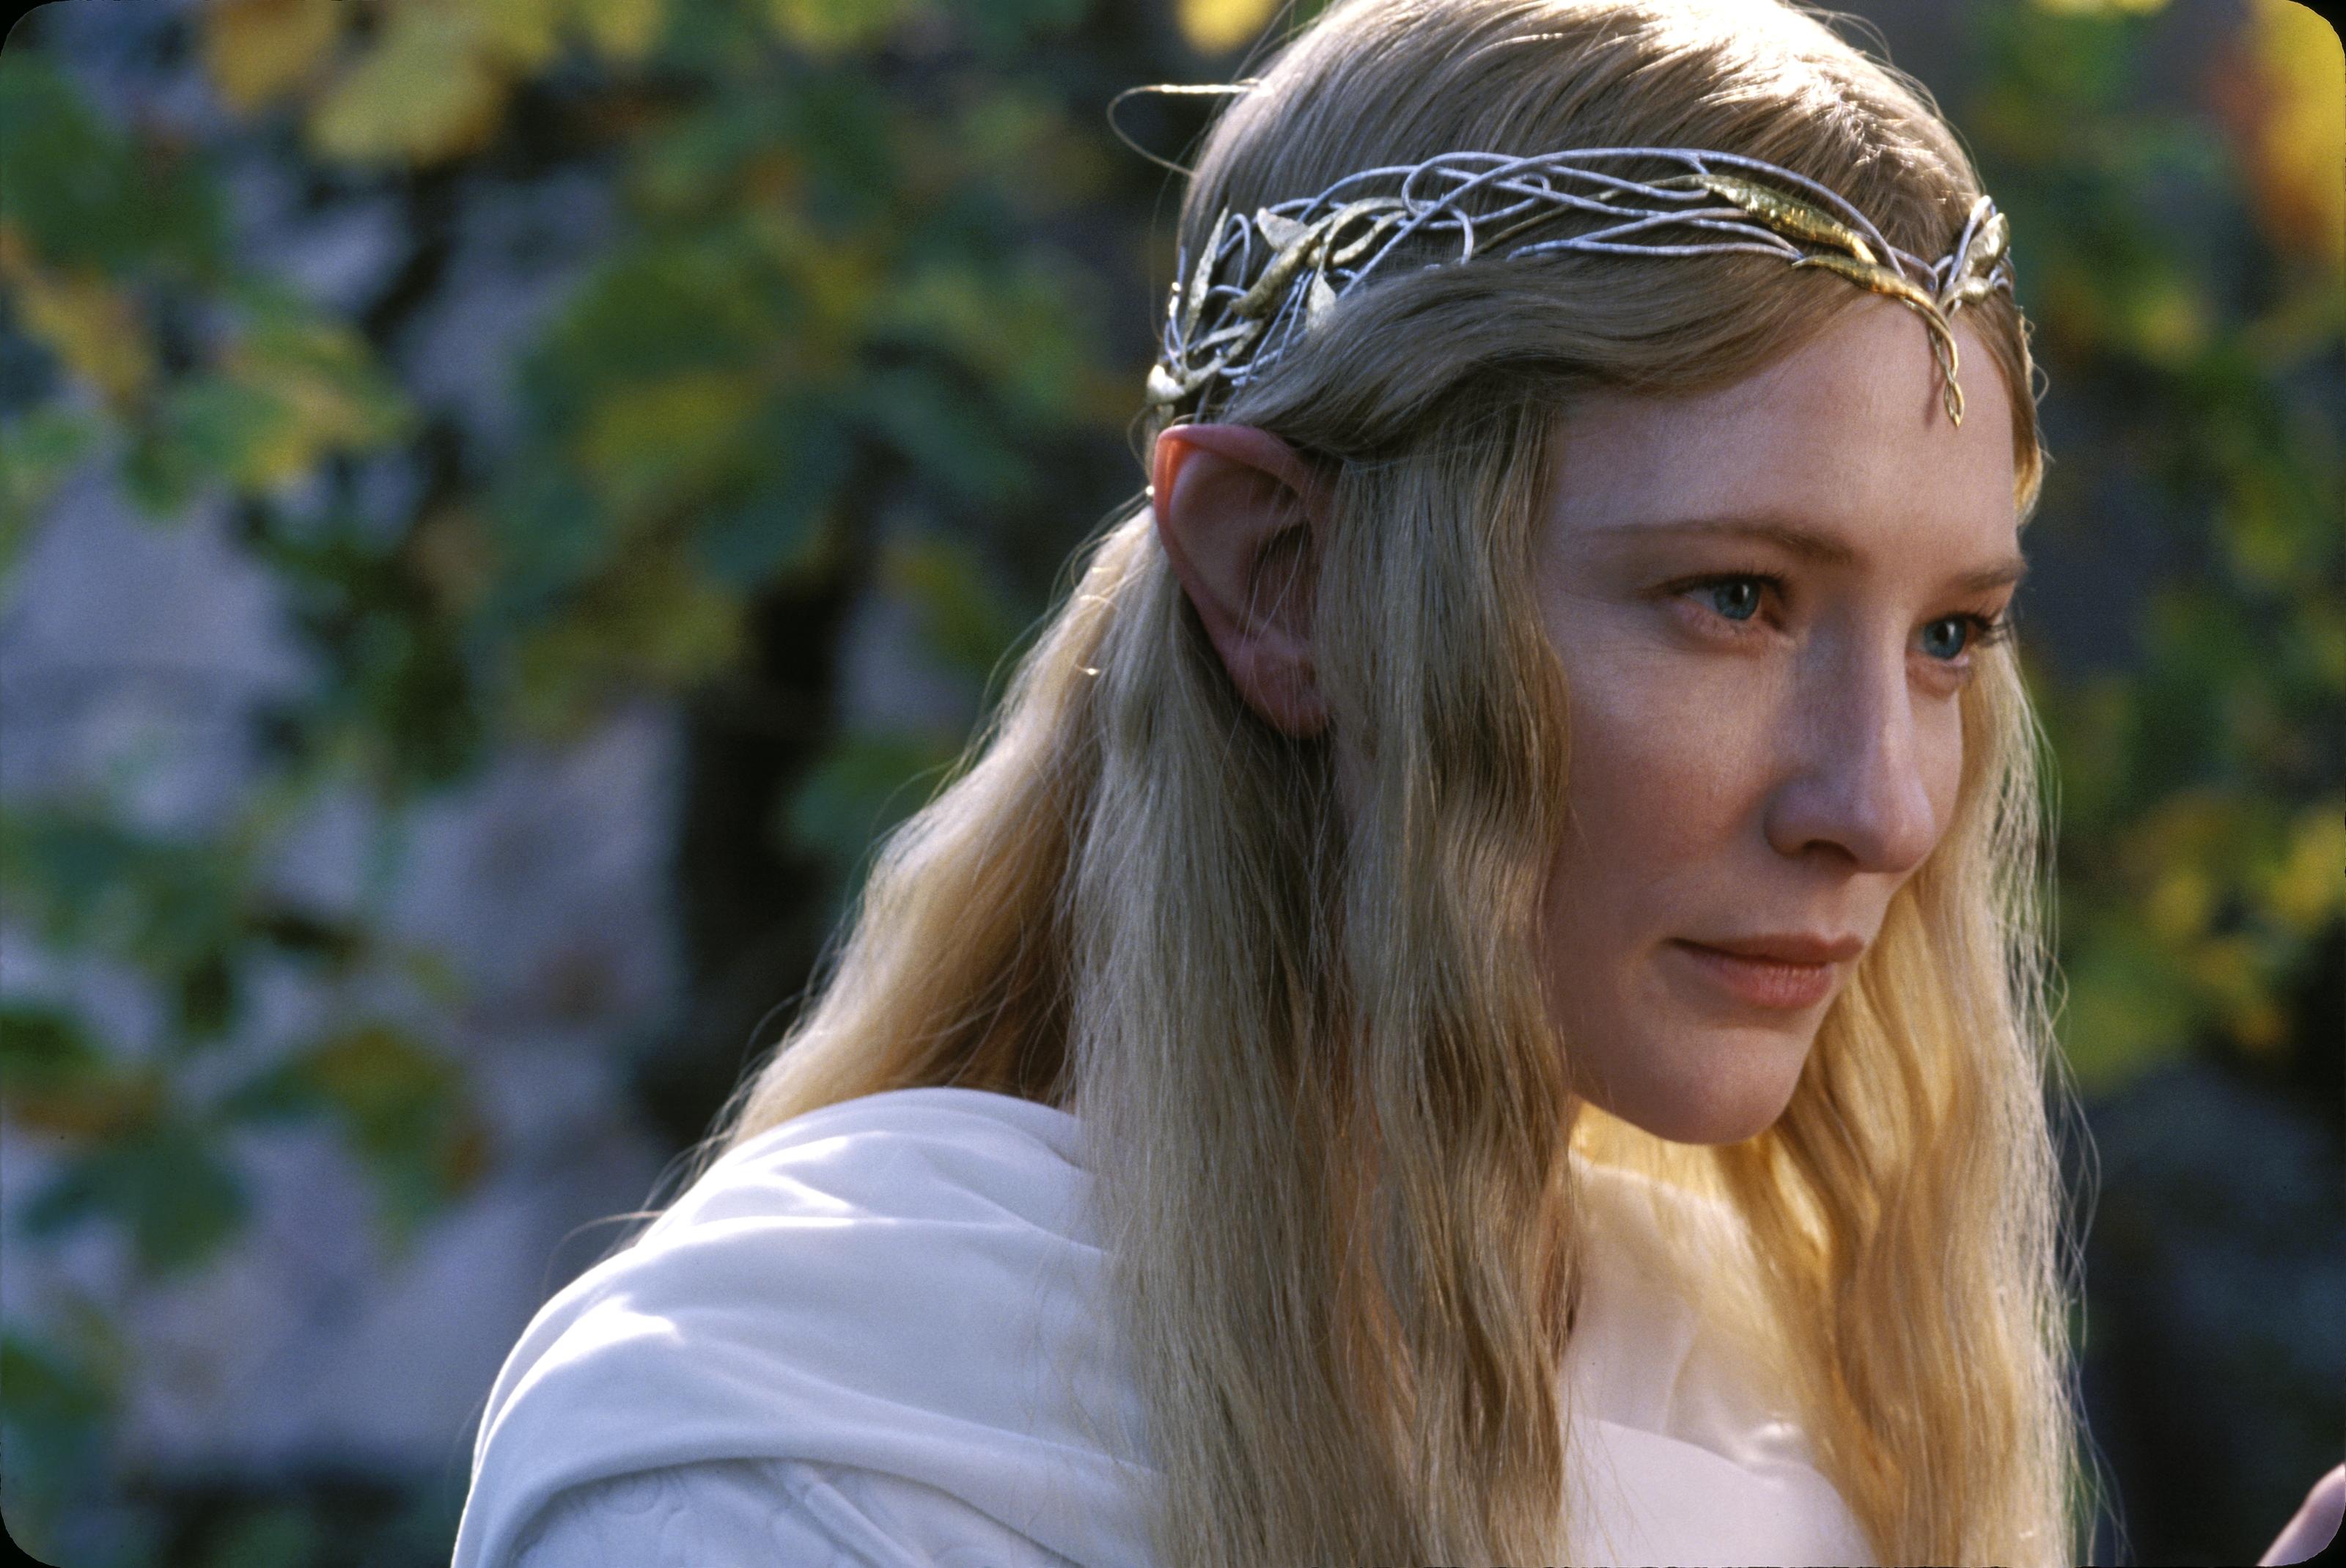 Cate Blanchett as Galadriel in 'The Lord of the Rings: The Fellowship of the Ring' (New Line Cinema)